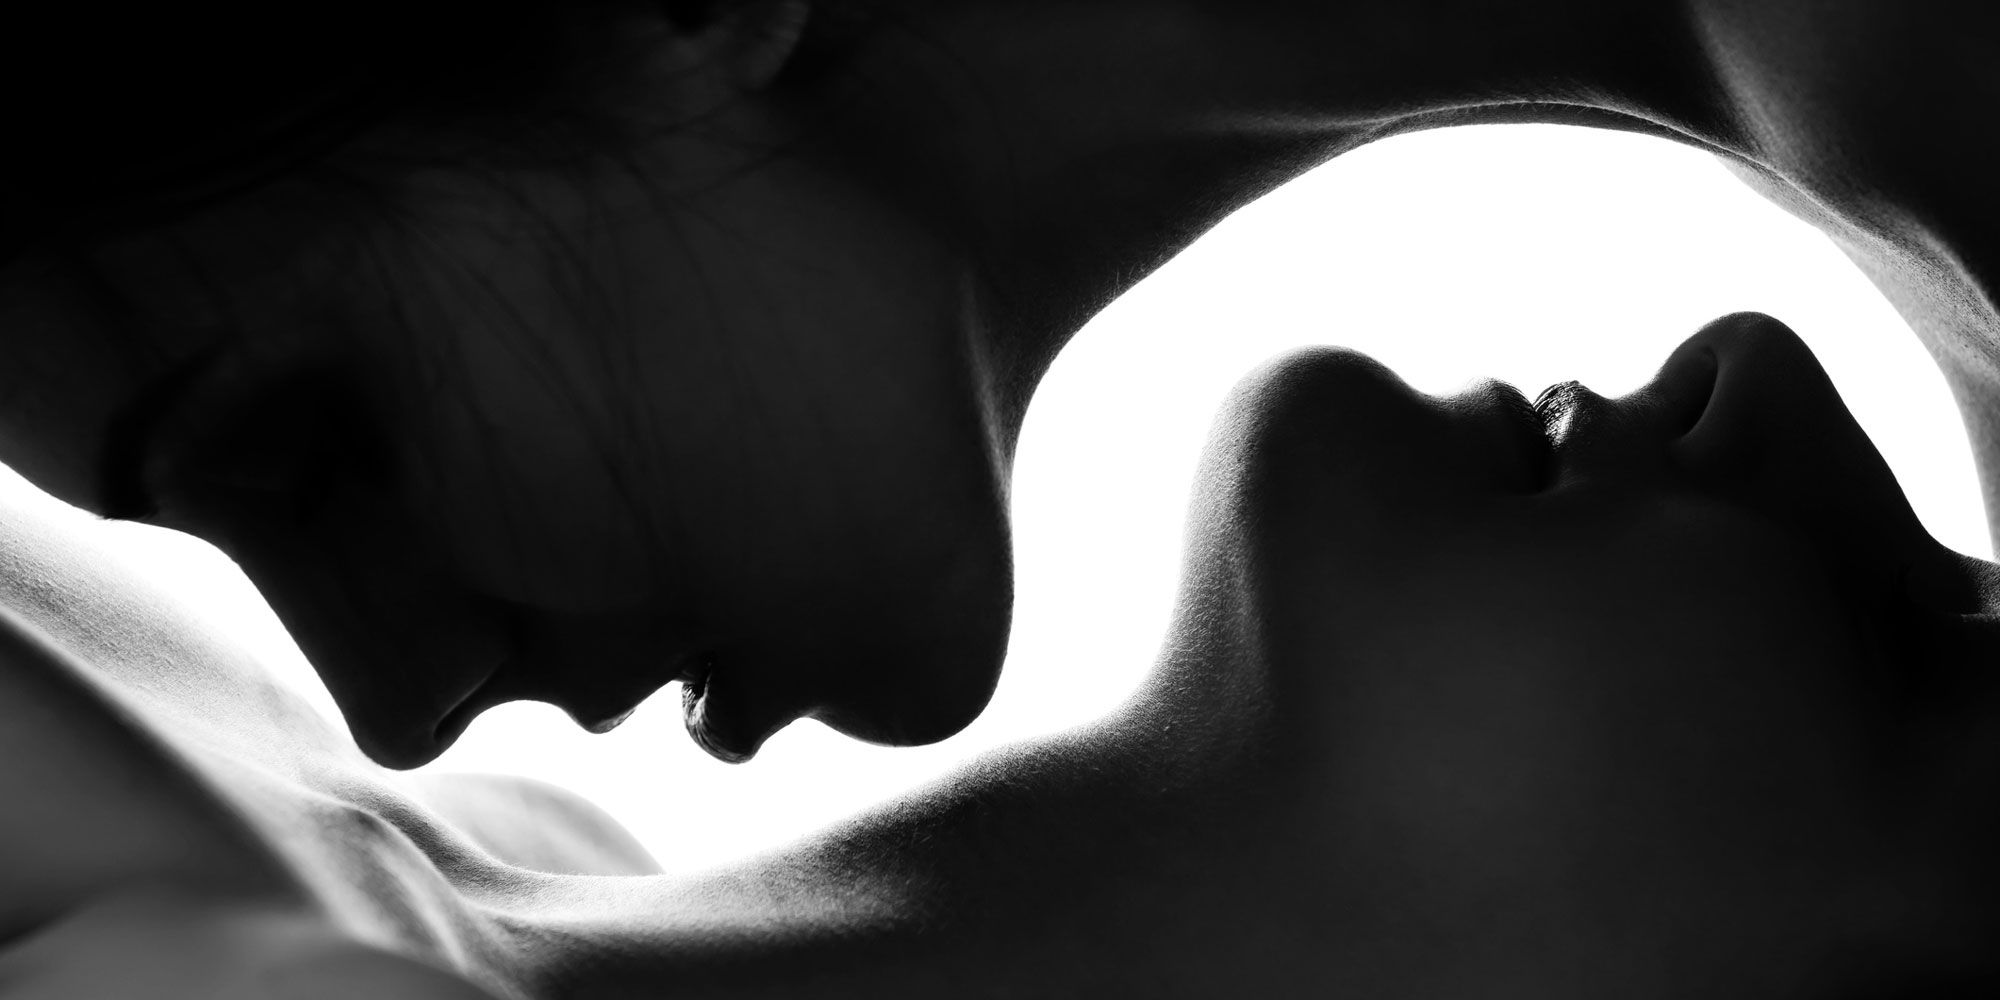 Freaky Sex Black And White - 61 Hot Sex Games For Couples To Spice Up Your Relationship in 2023